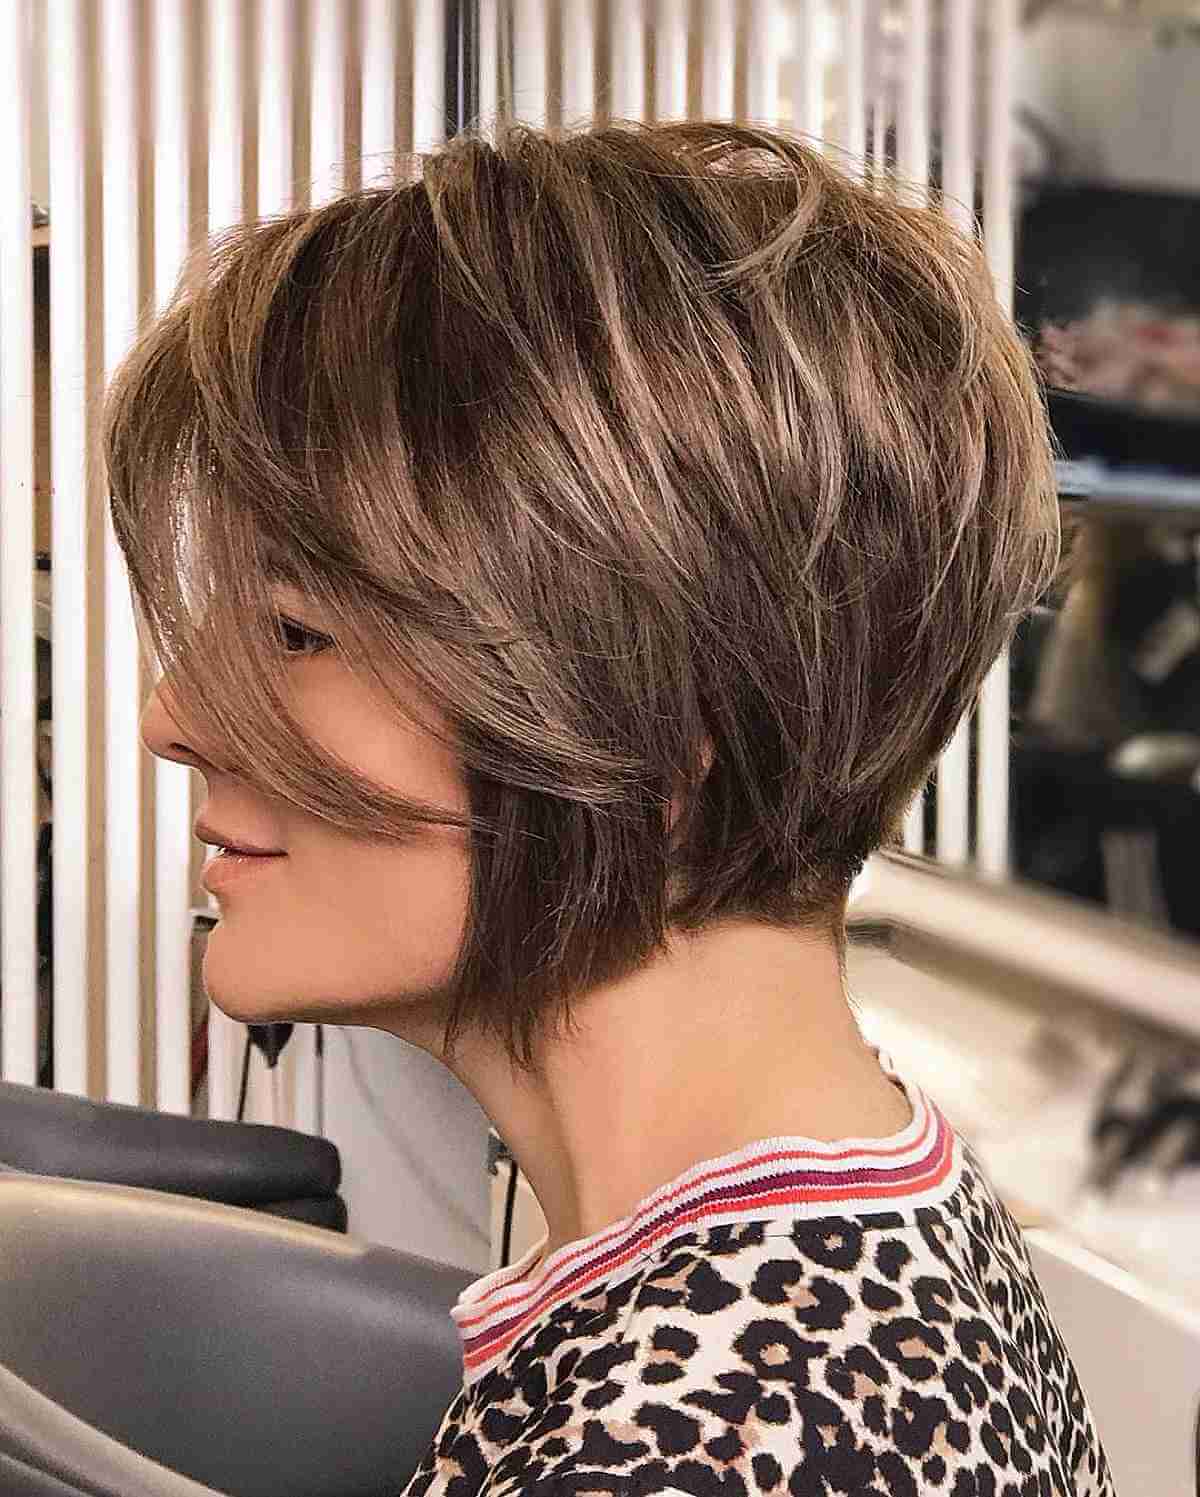 20 Back View Of Short Layered Haircuts To Inspire You